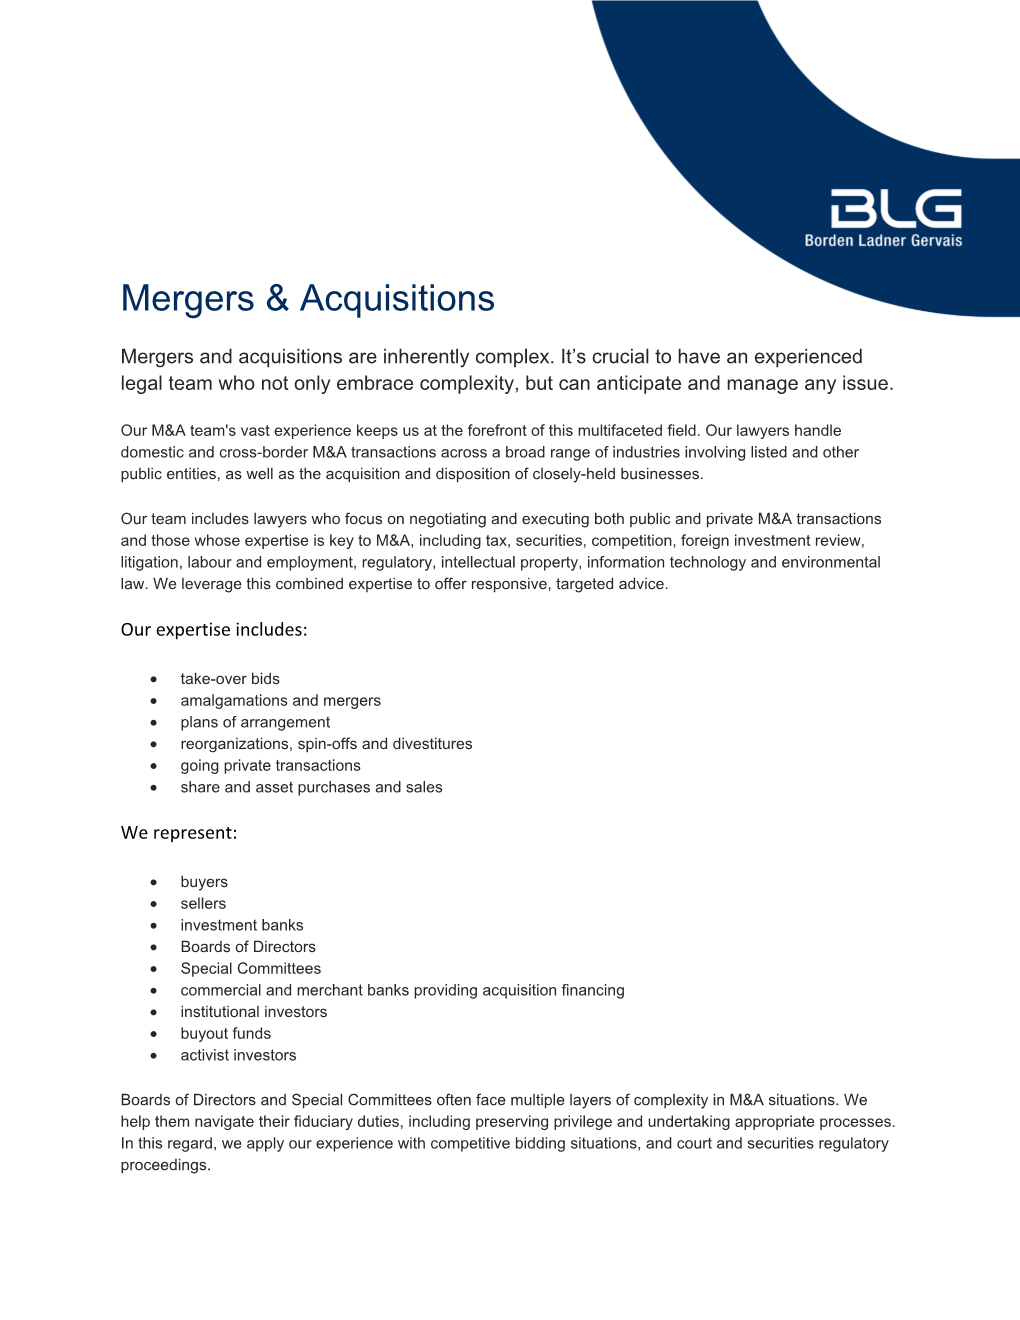 BLG Has Been Involved in Many Mergers, Acquisitions, Divestitures, Spin-Offs and Restructurings